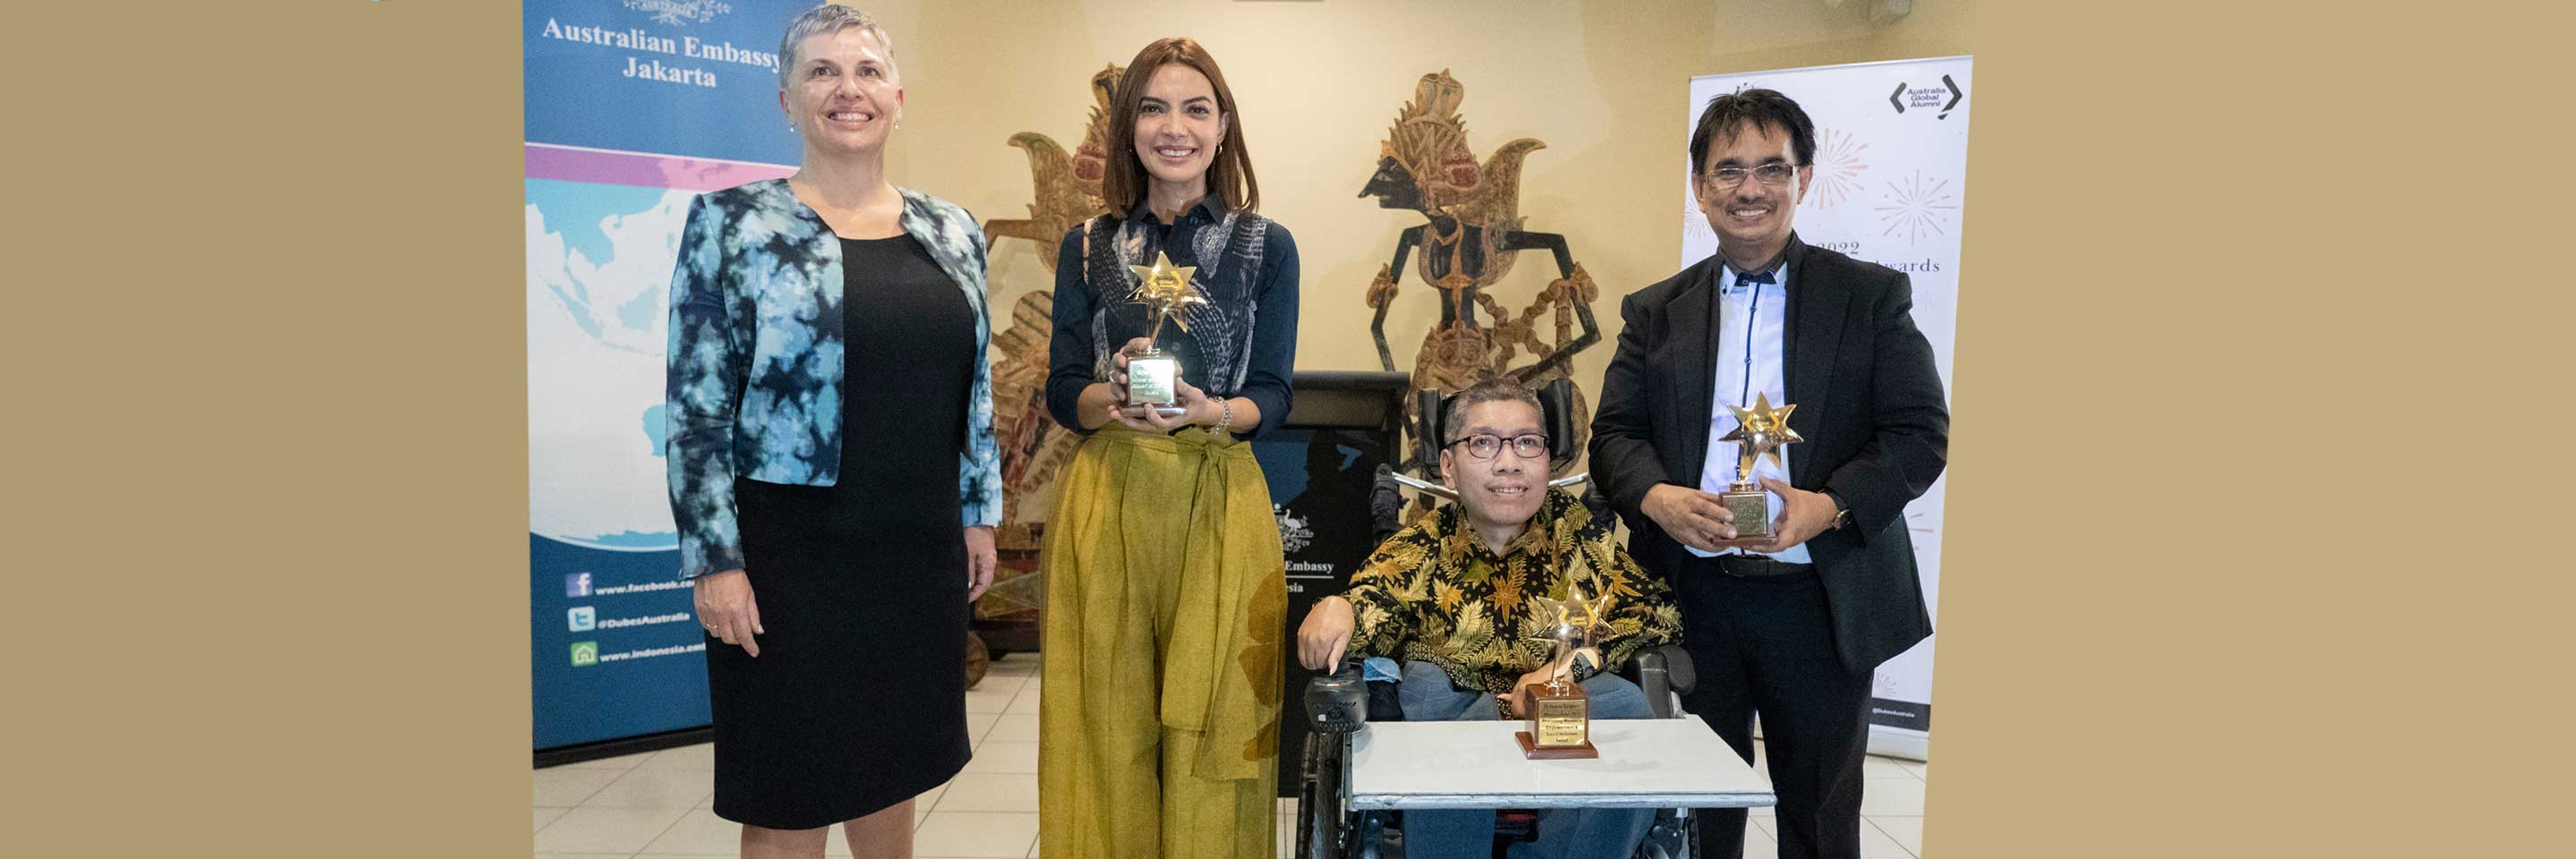 The Australian Ambassador to Indonesia, Penny Williams PSM, presents the 2022 Alumni Awards to Najwa Shihab, Syaifullah Muhammad, and Antoni Tsaputra, who have made exemplary contributions to their profession and community through exceptional leadership,